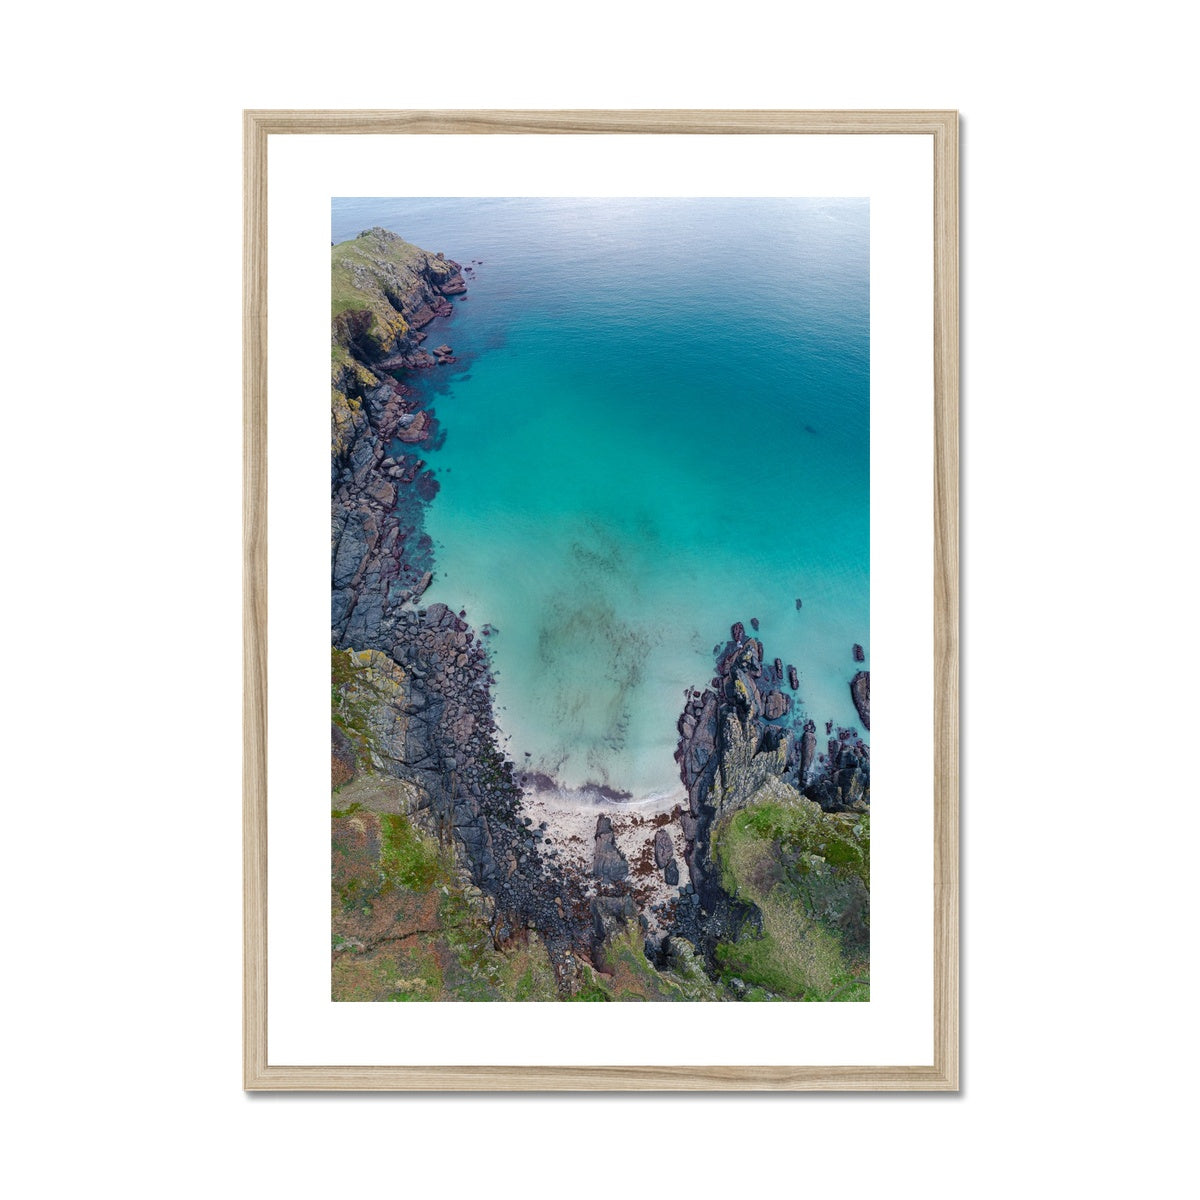 housel bay from above wooden frame